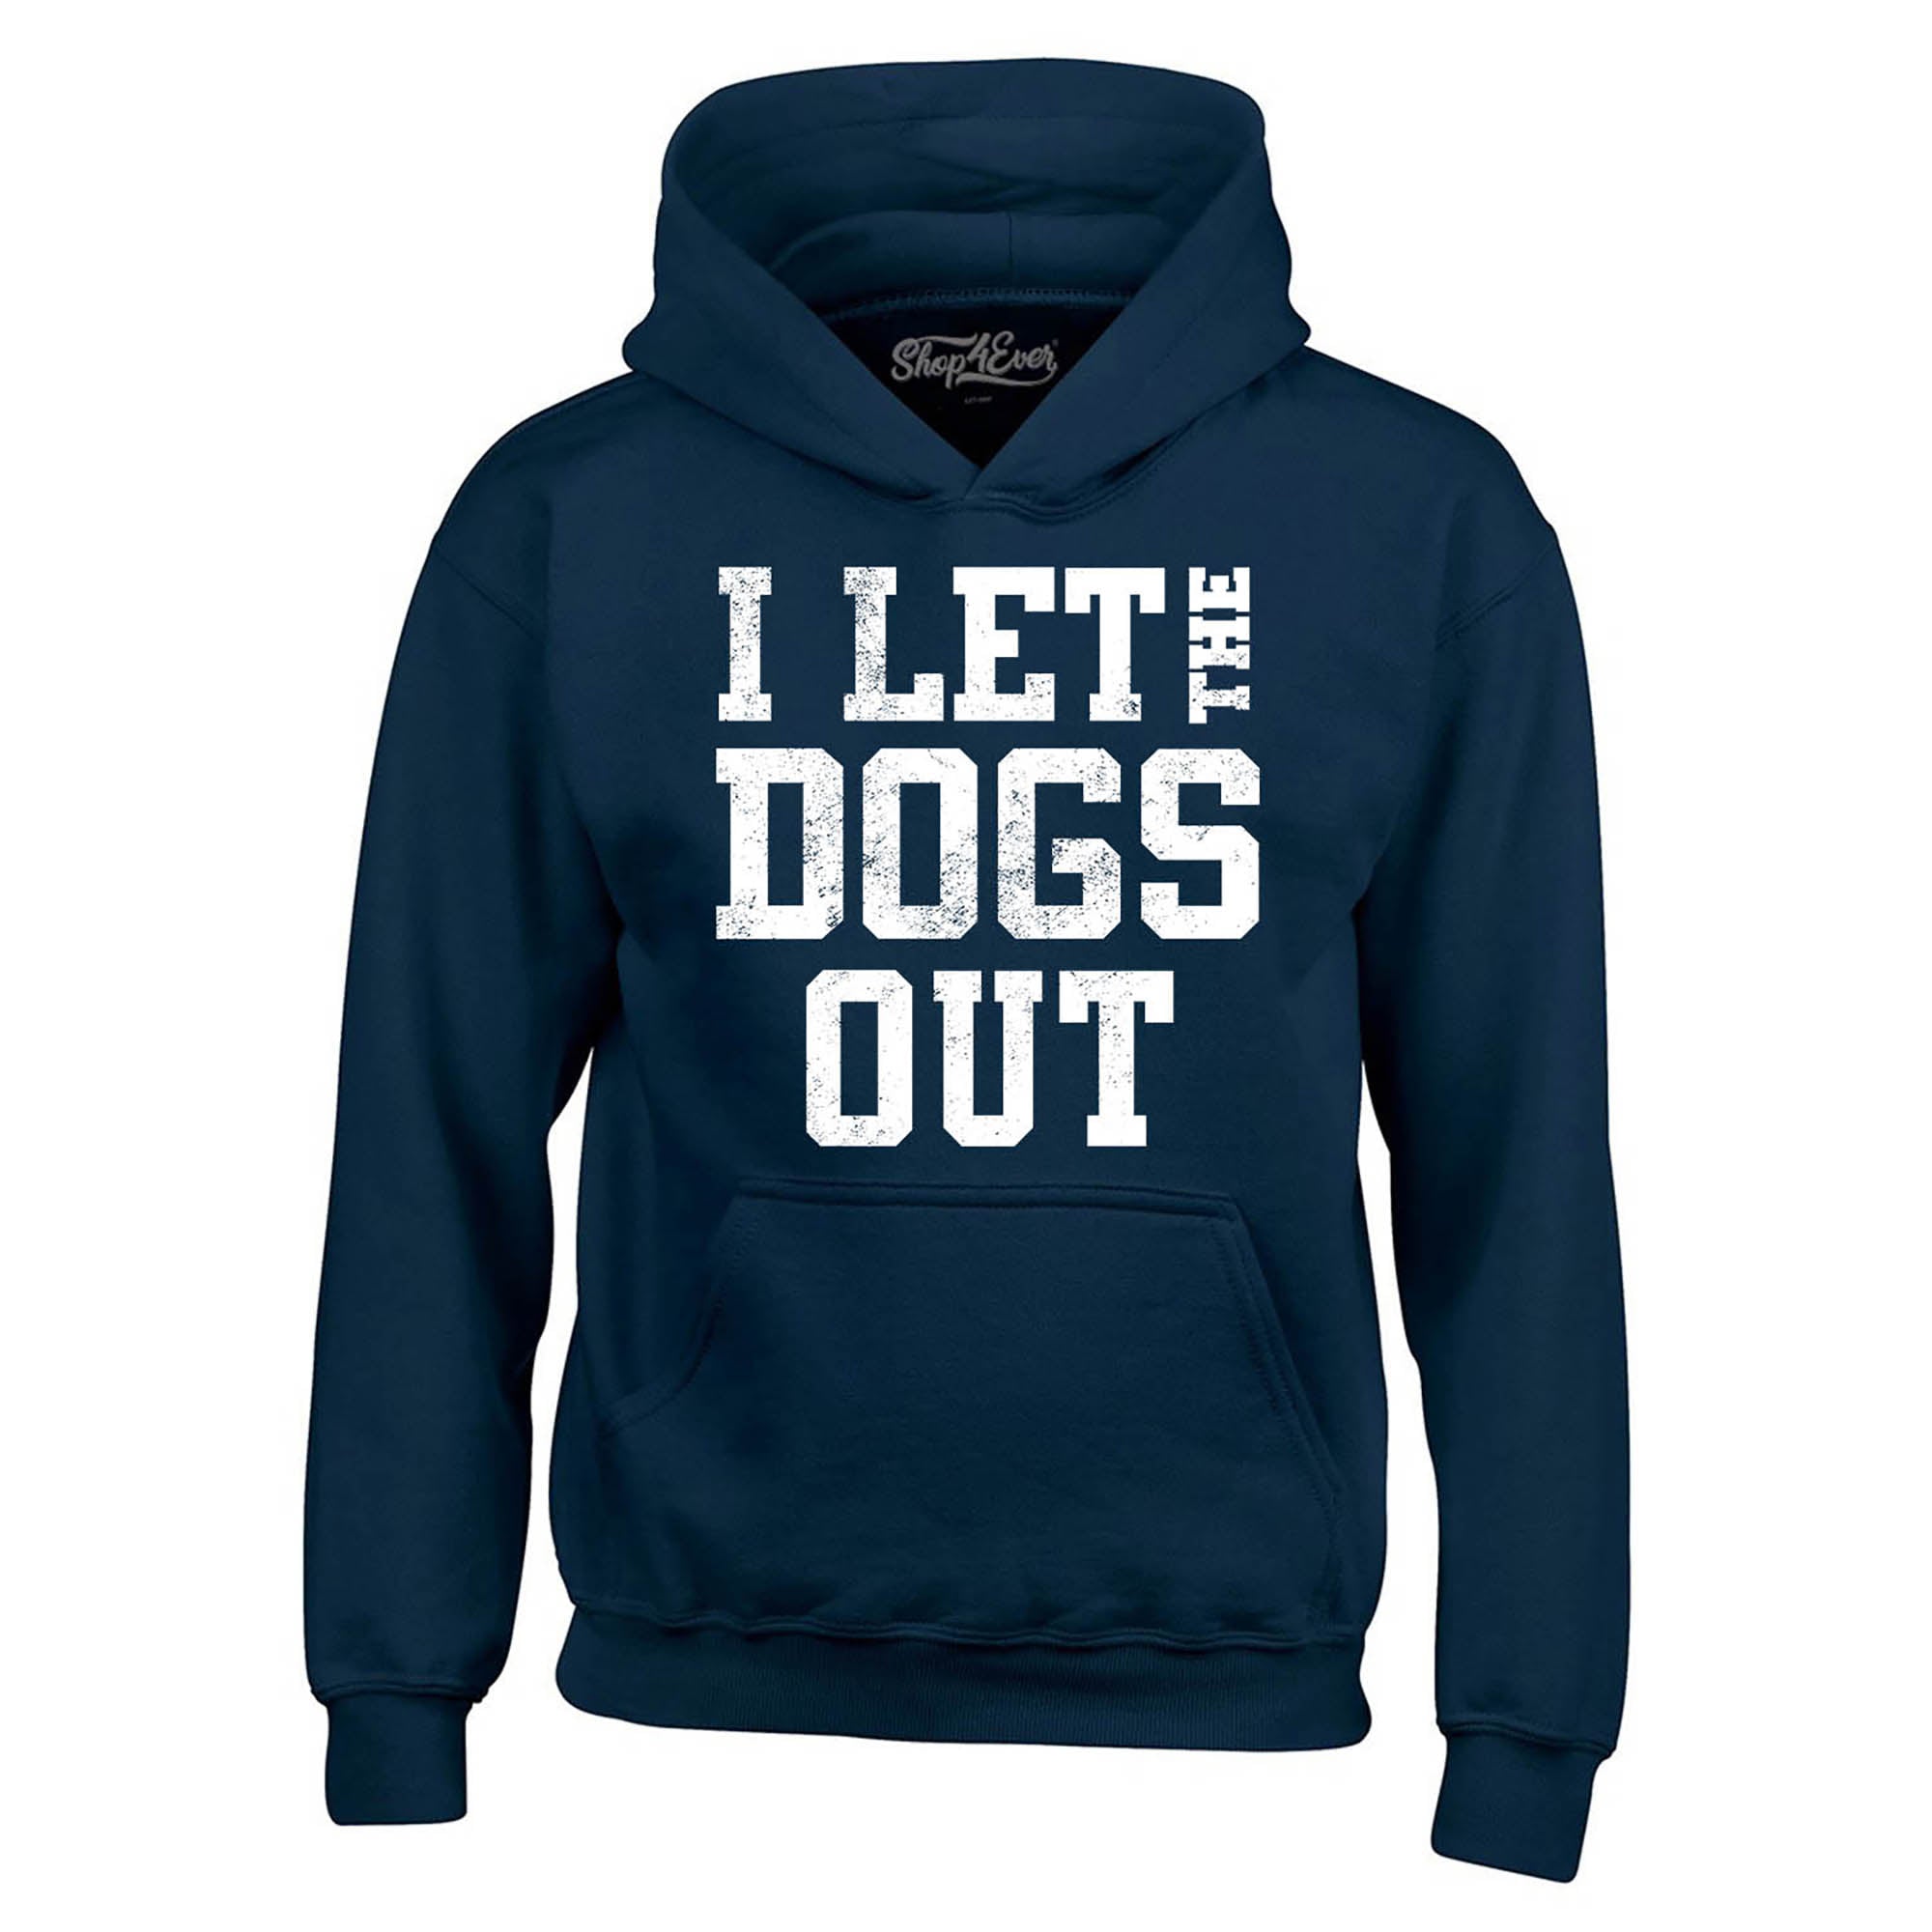 I Let the Dogs Out Hoodie Sweatshirts